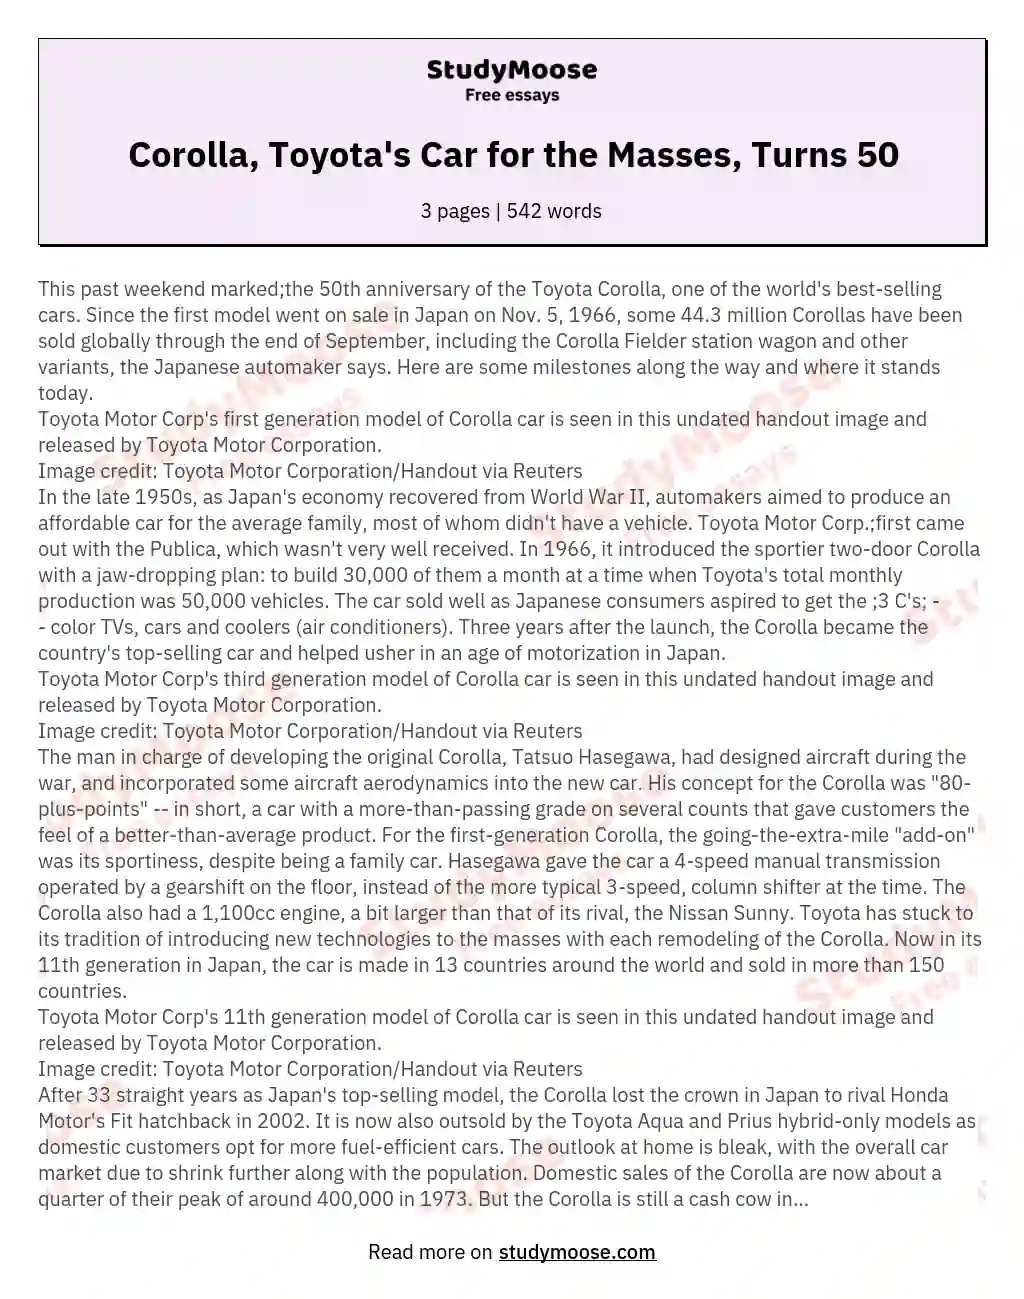 Corolla, Toyota's Car for the Masses, Turns 50 essay